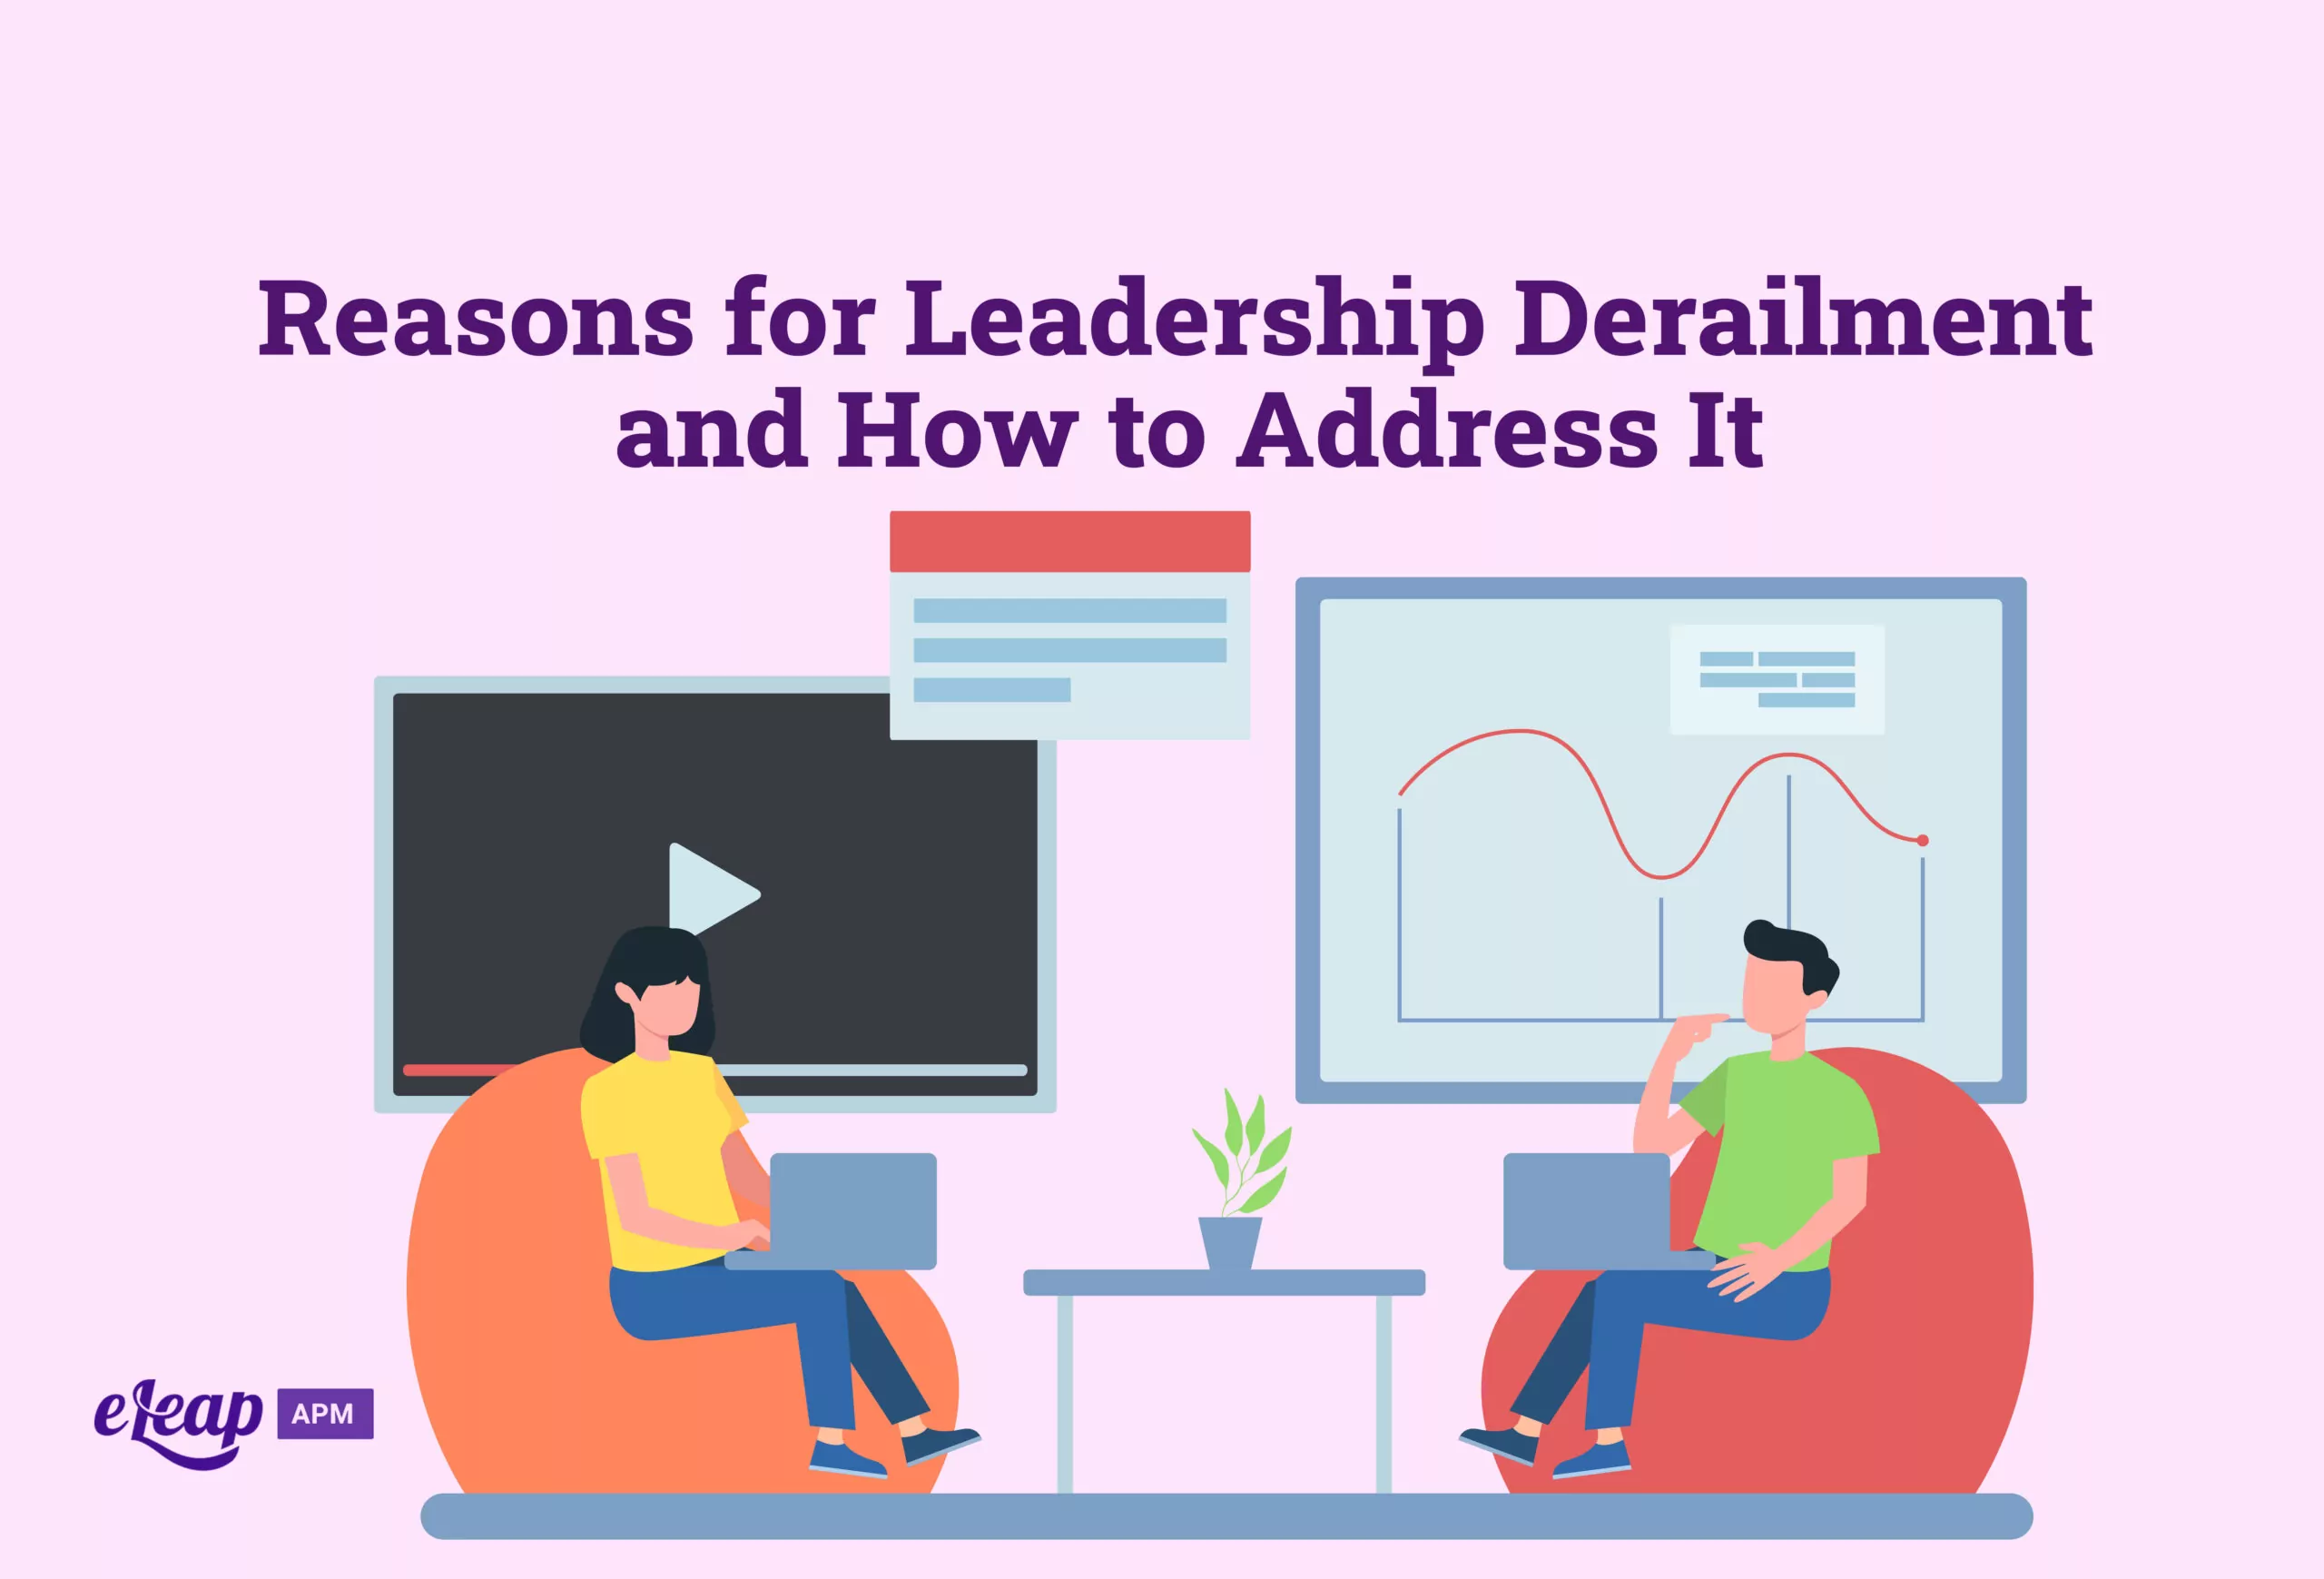 Reasons for Leadership Derailment and How to Address It